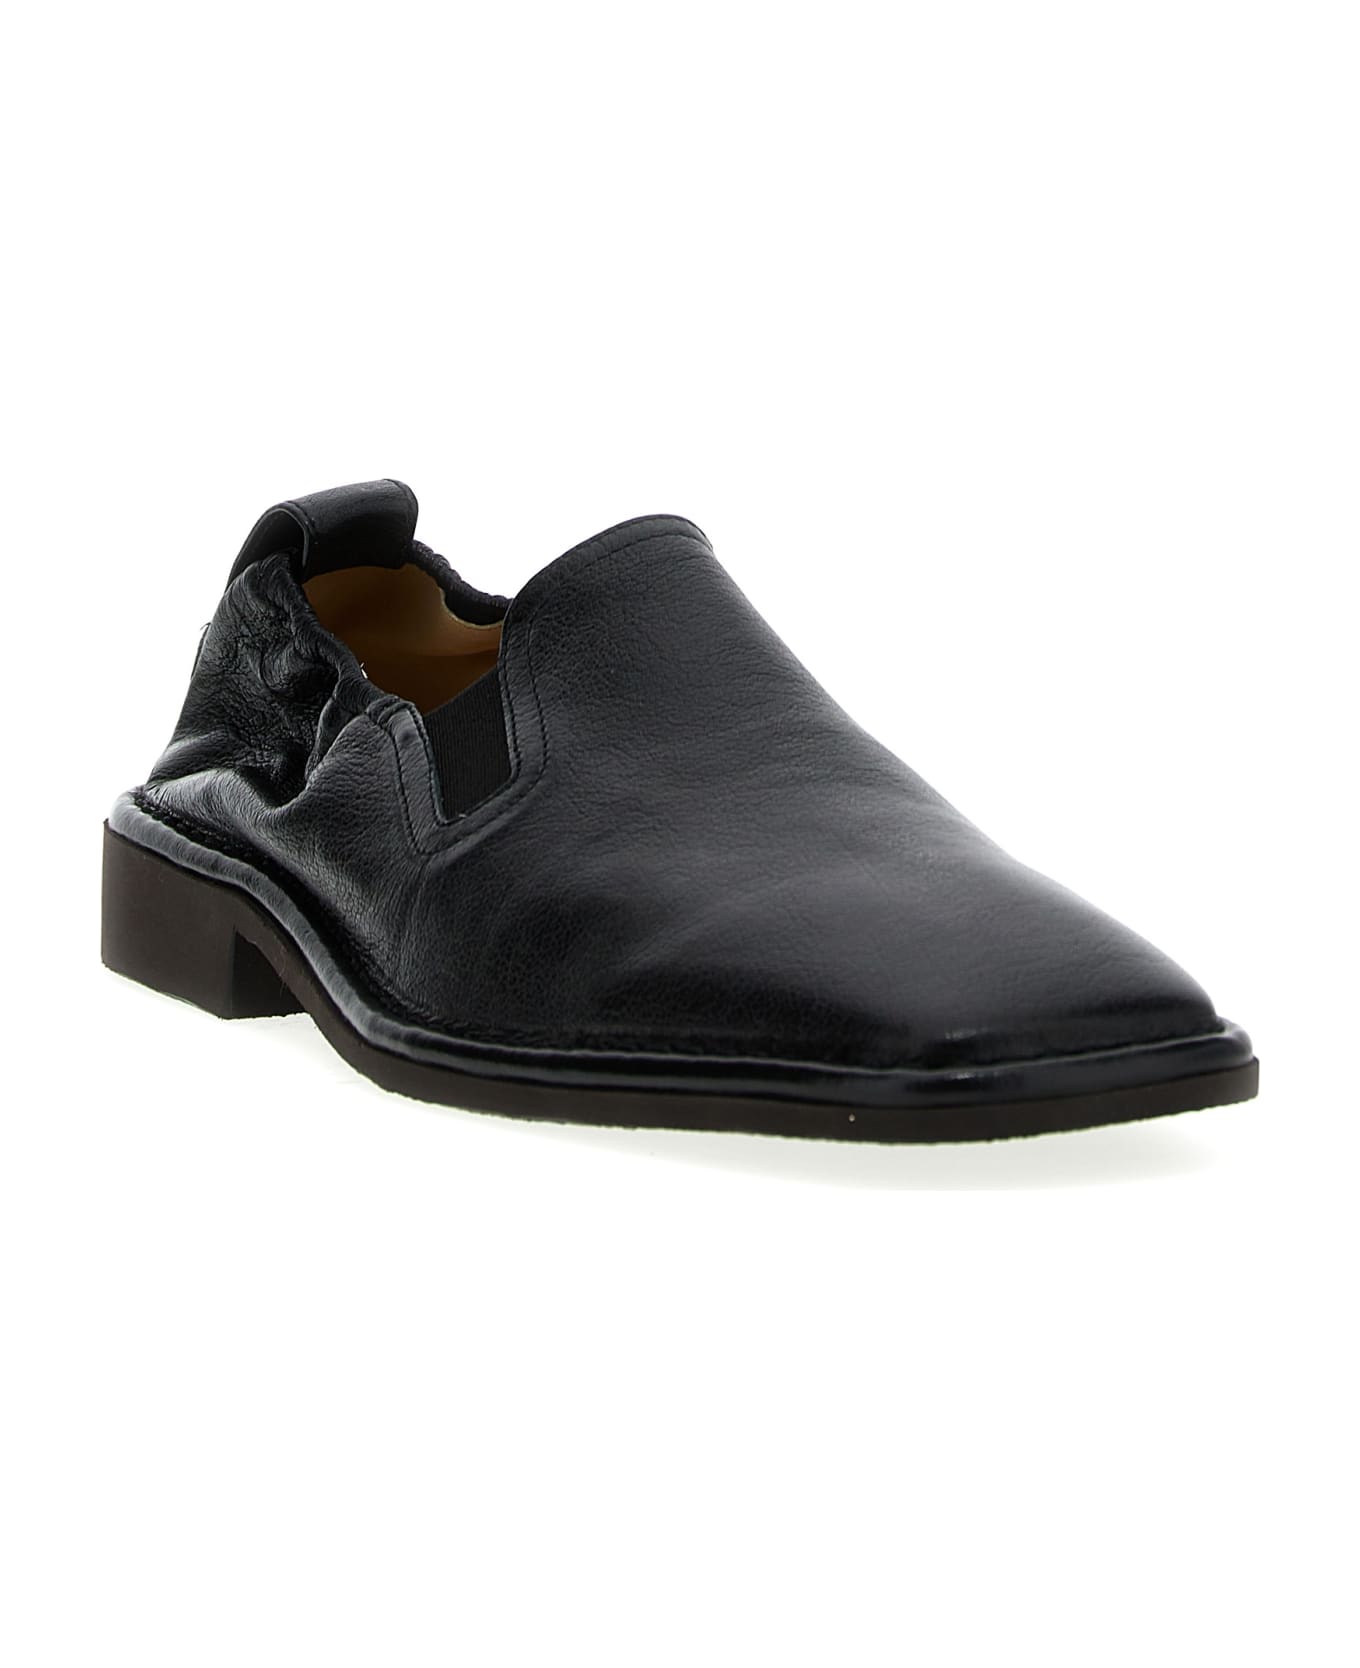 Lemaire Buffalo Leather Loafers - Black